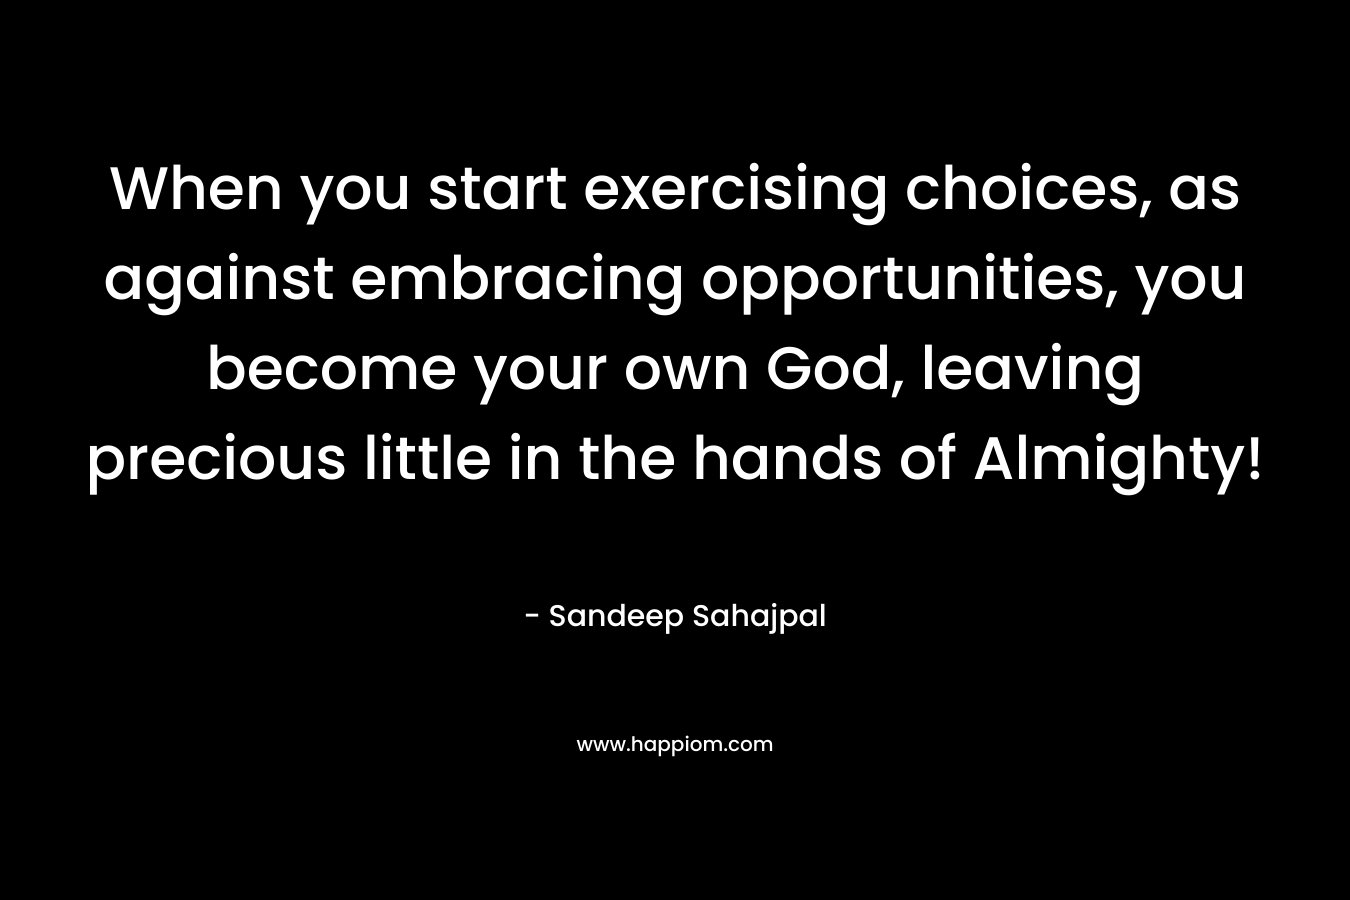 When you start exercising choices, as against embracing opportunities, you become your own God, leaving precious little in the hands of Almighty!